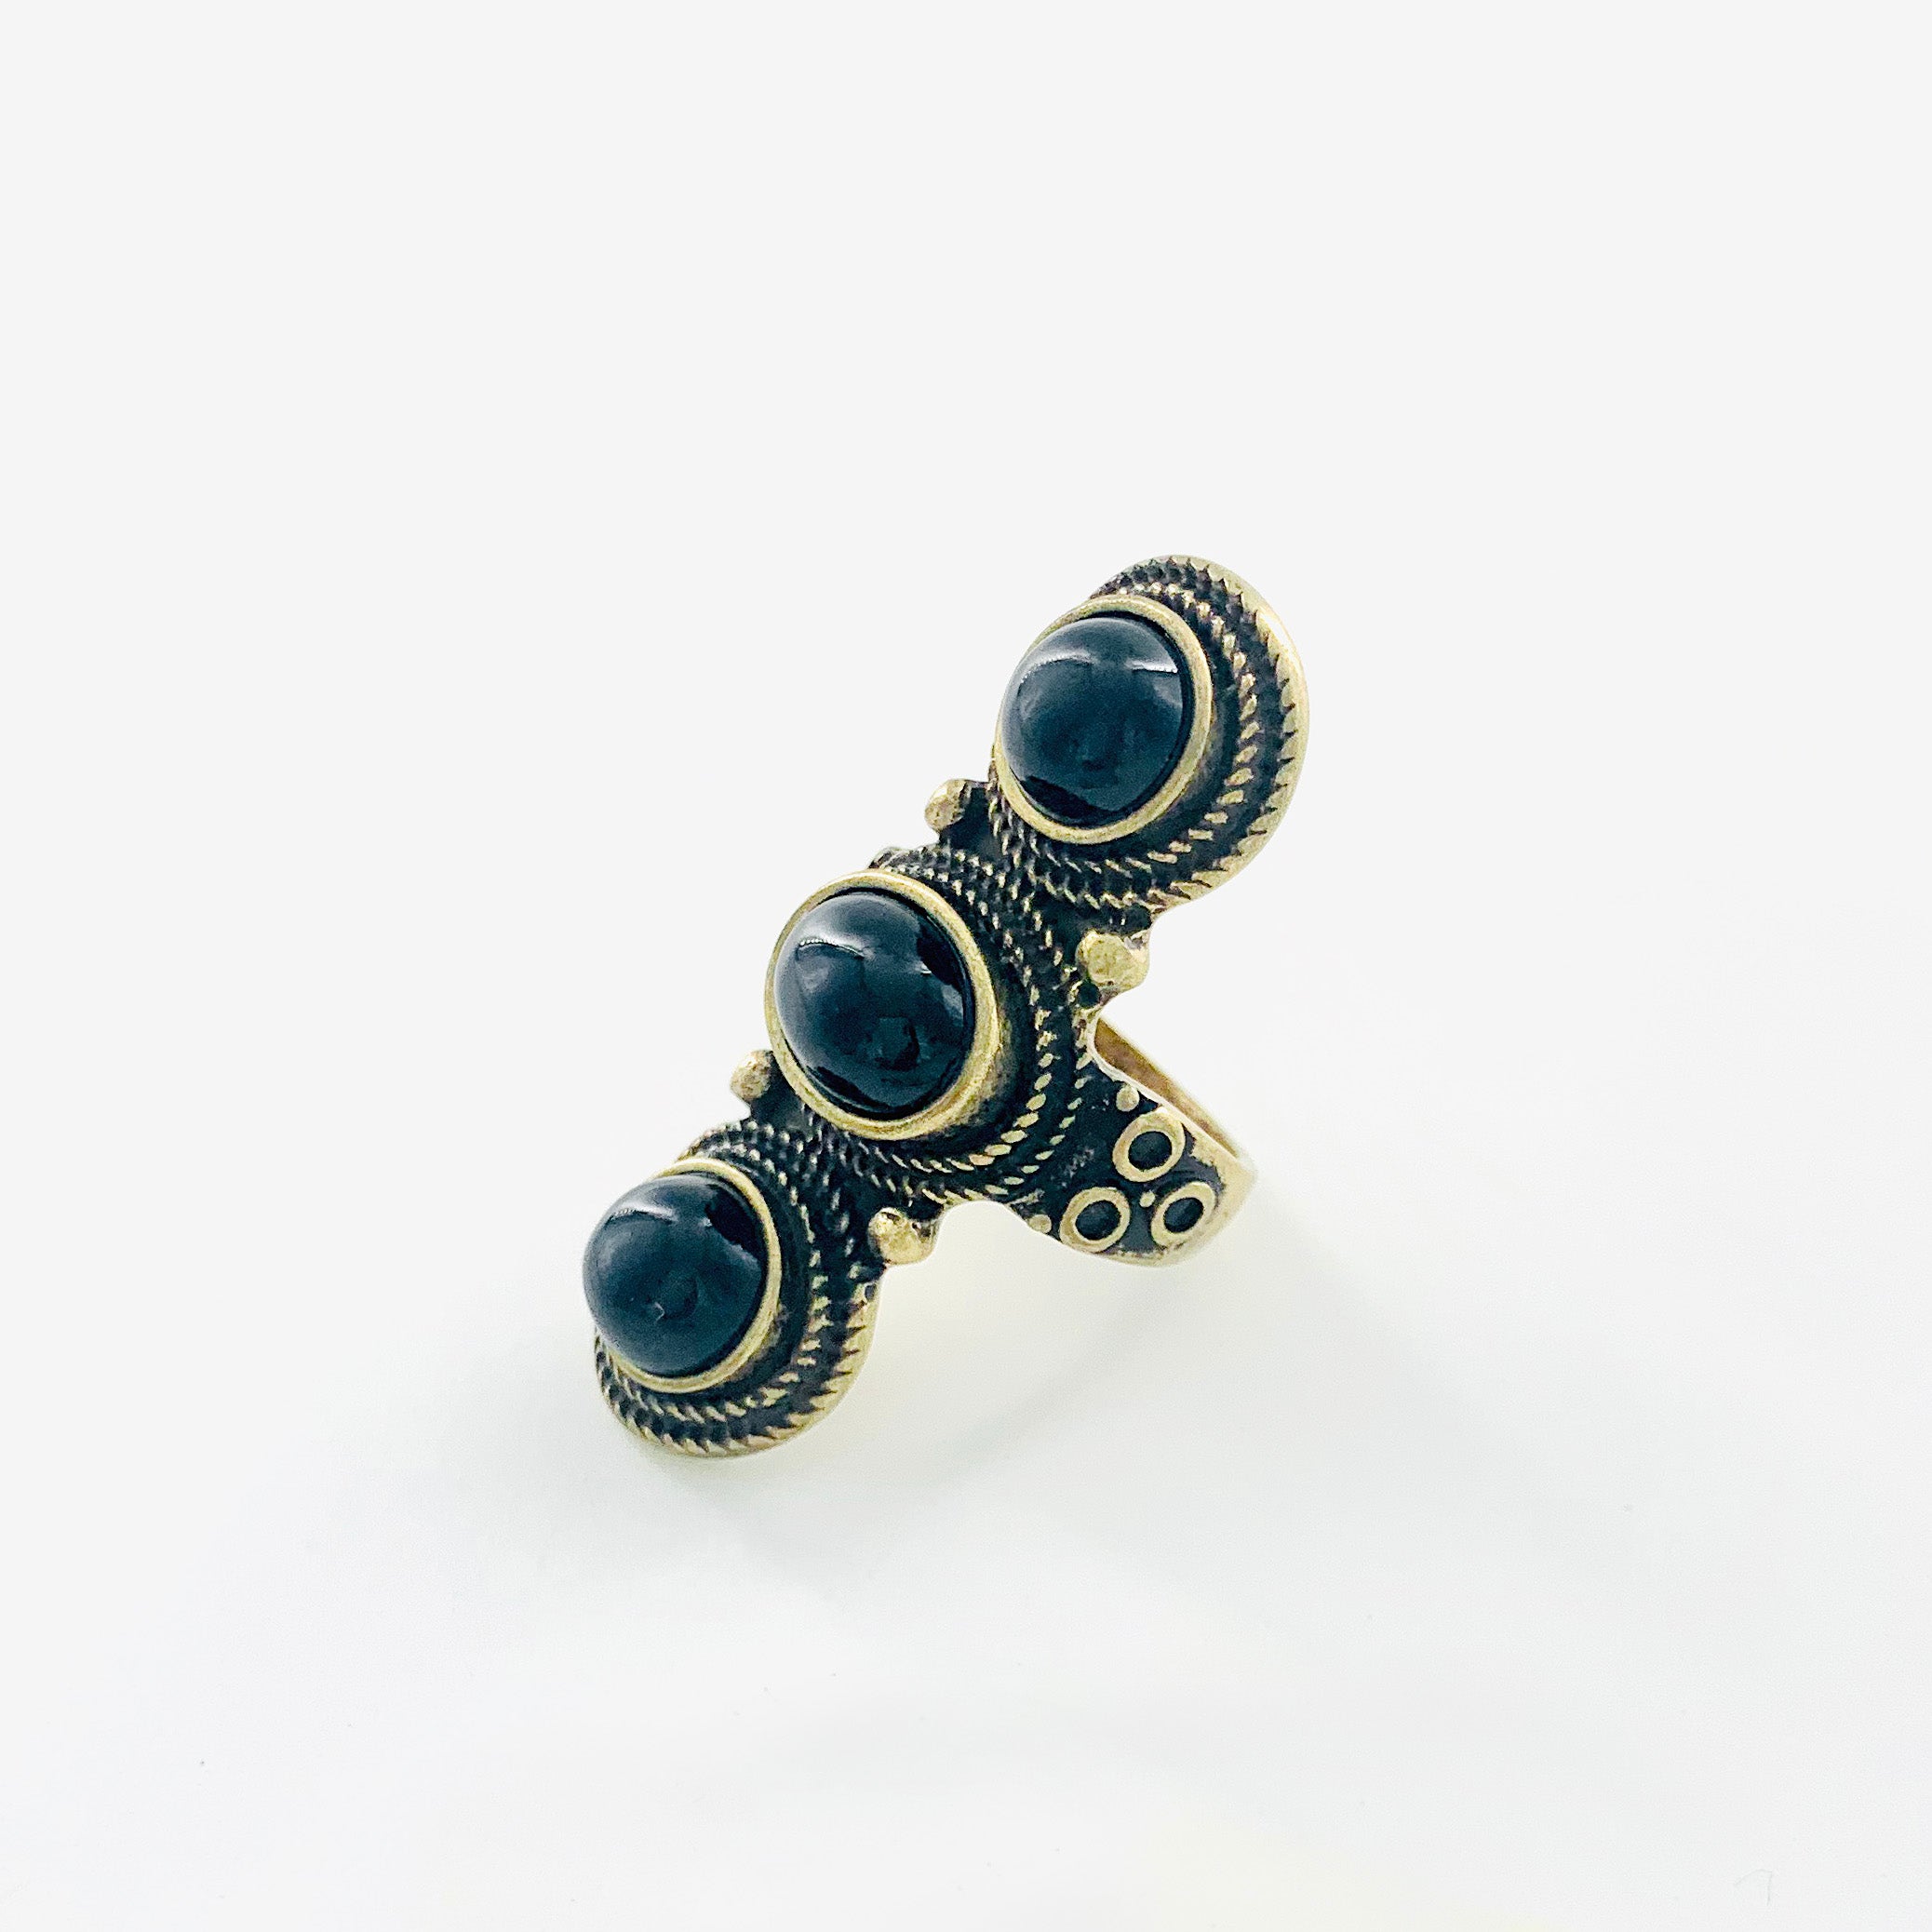 Vintage-styled ring with black beads